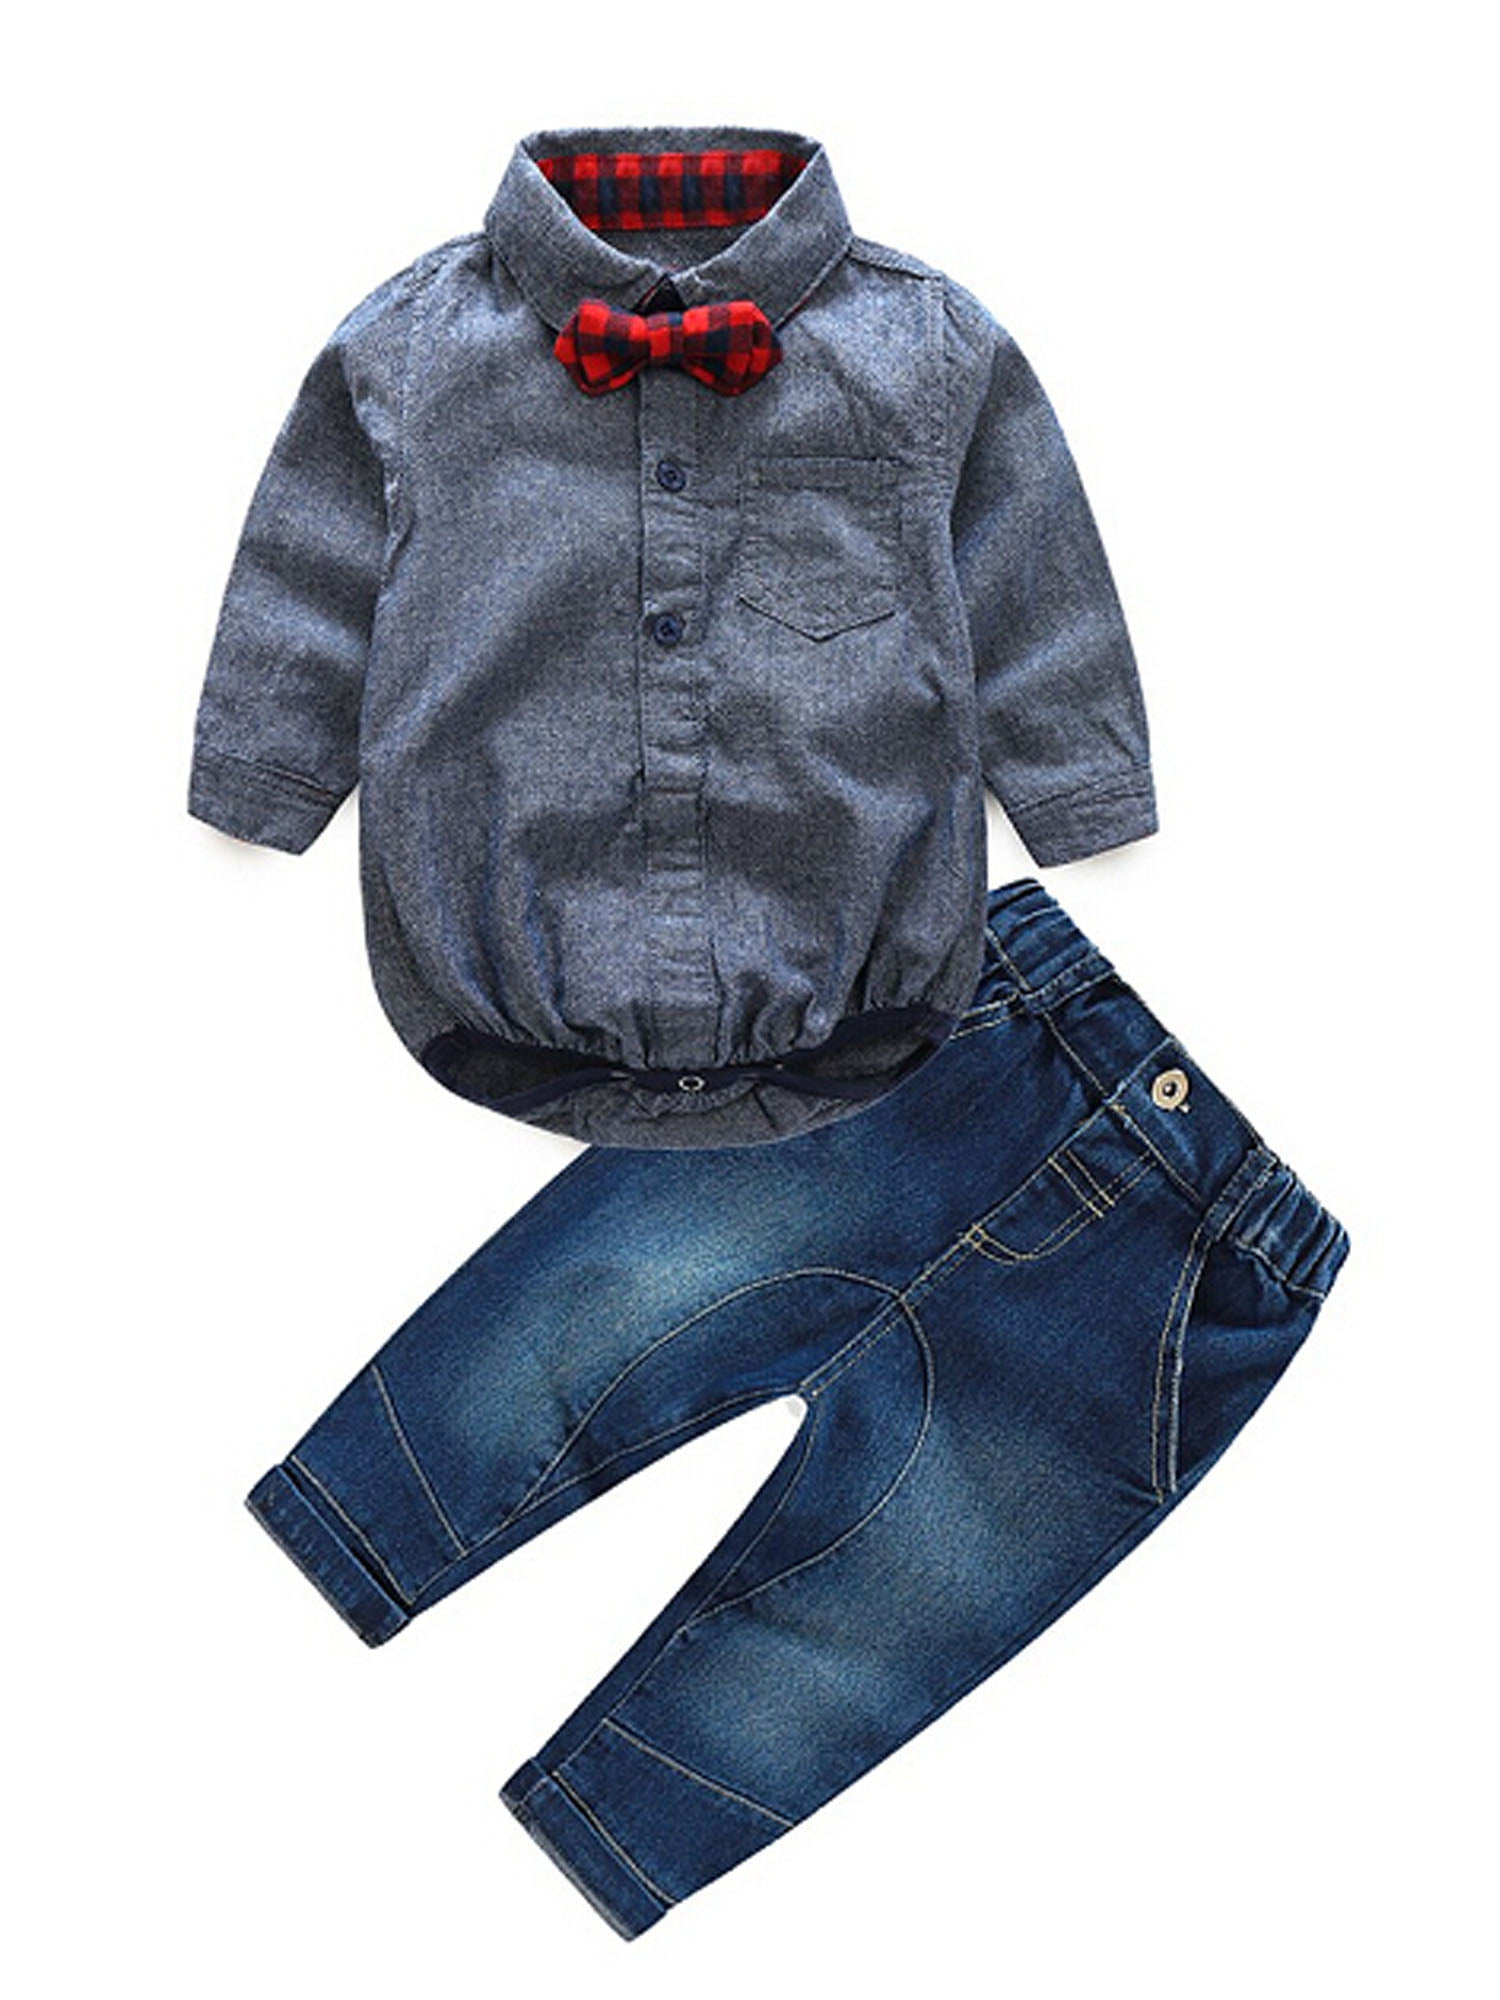 Details about   Toddler Baby Boys Gentleman Bow Tie T-Shirt Tops+Solid Shorts Overalls Outfits 